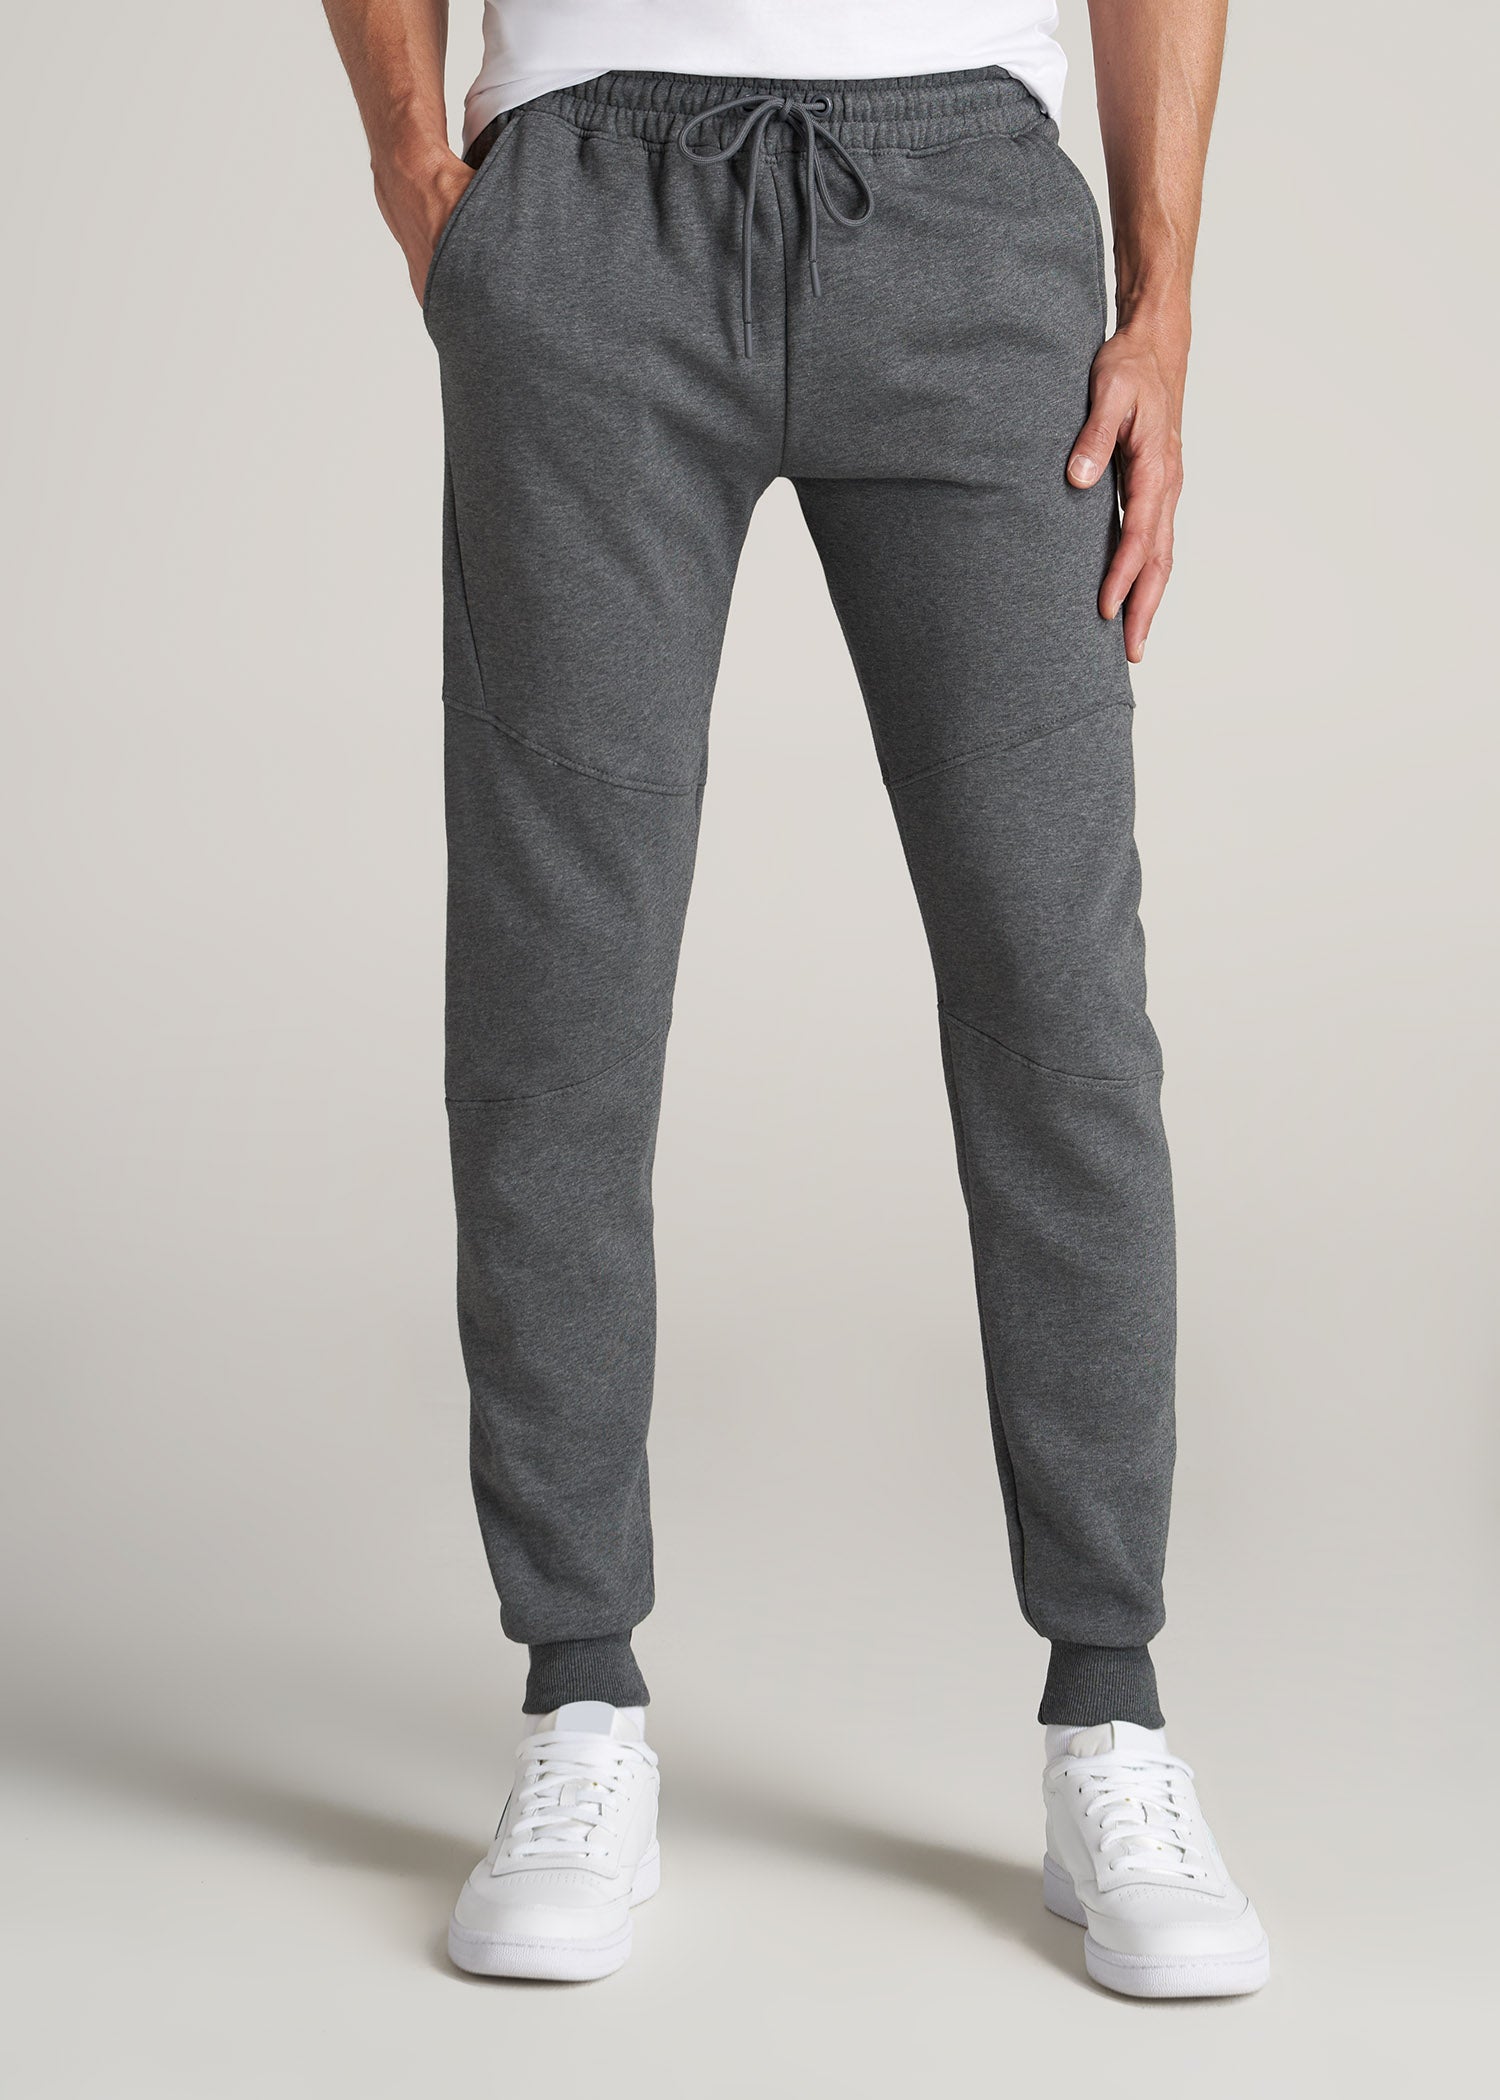 Wearever Fleece Joggers for Tall Men in Charcoal Mix